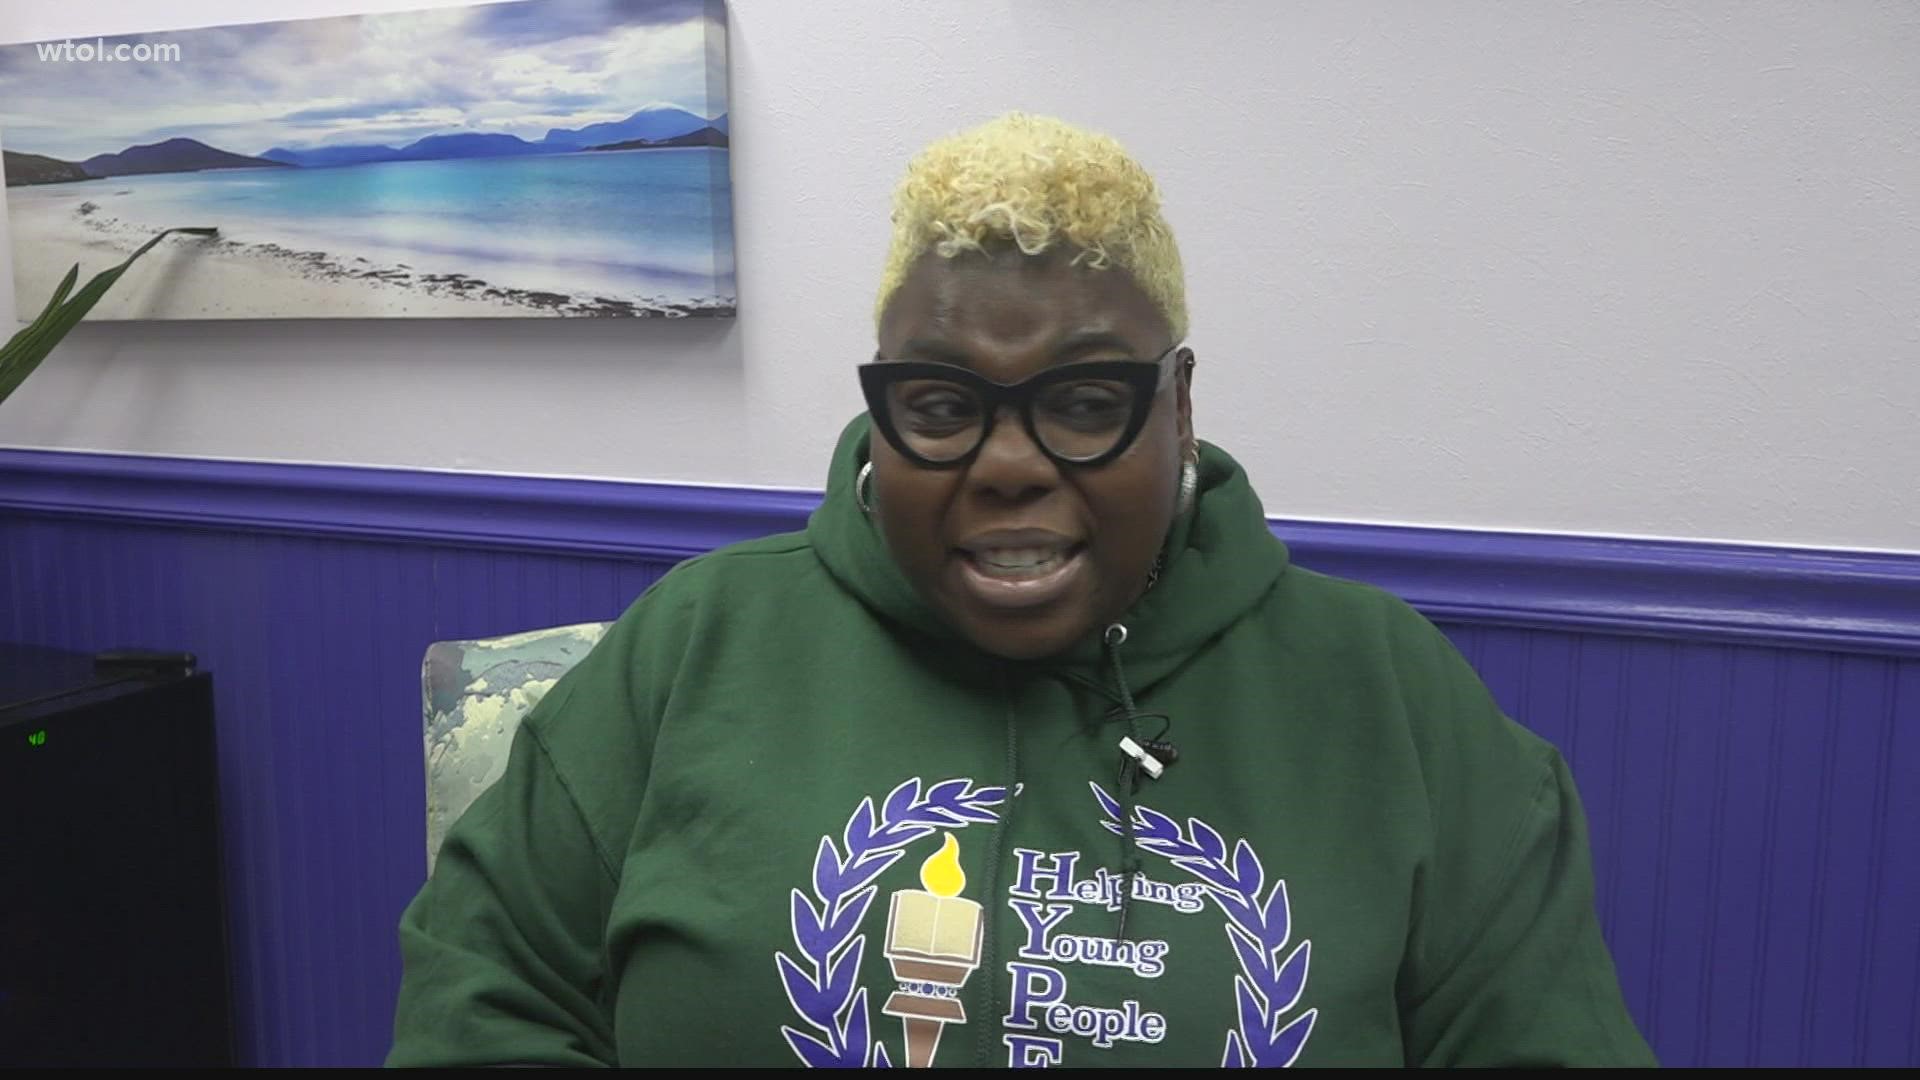 Aralana Alexander with H.Y.P.E. LLC, says everyone, even if they don't live where a violent crime has taken place, should look to see how they can help.